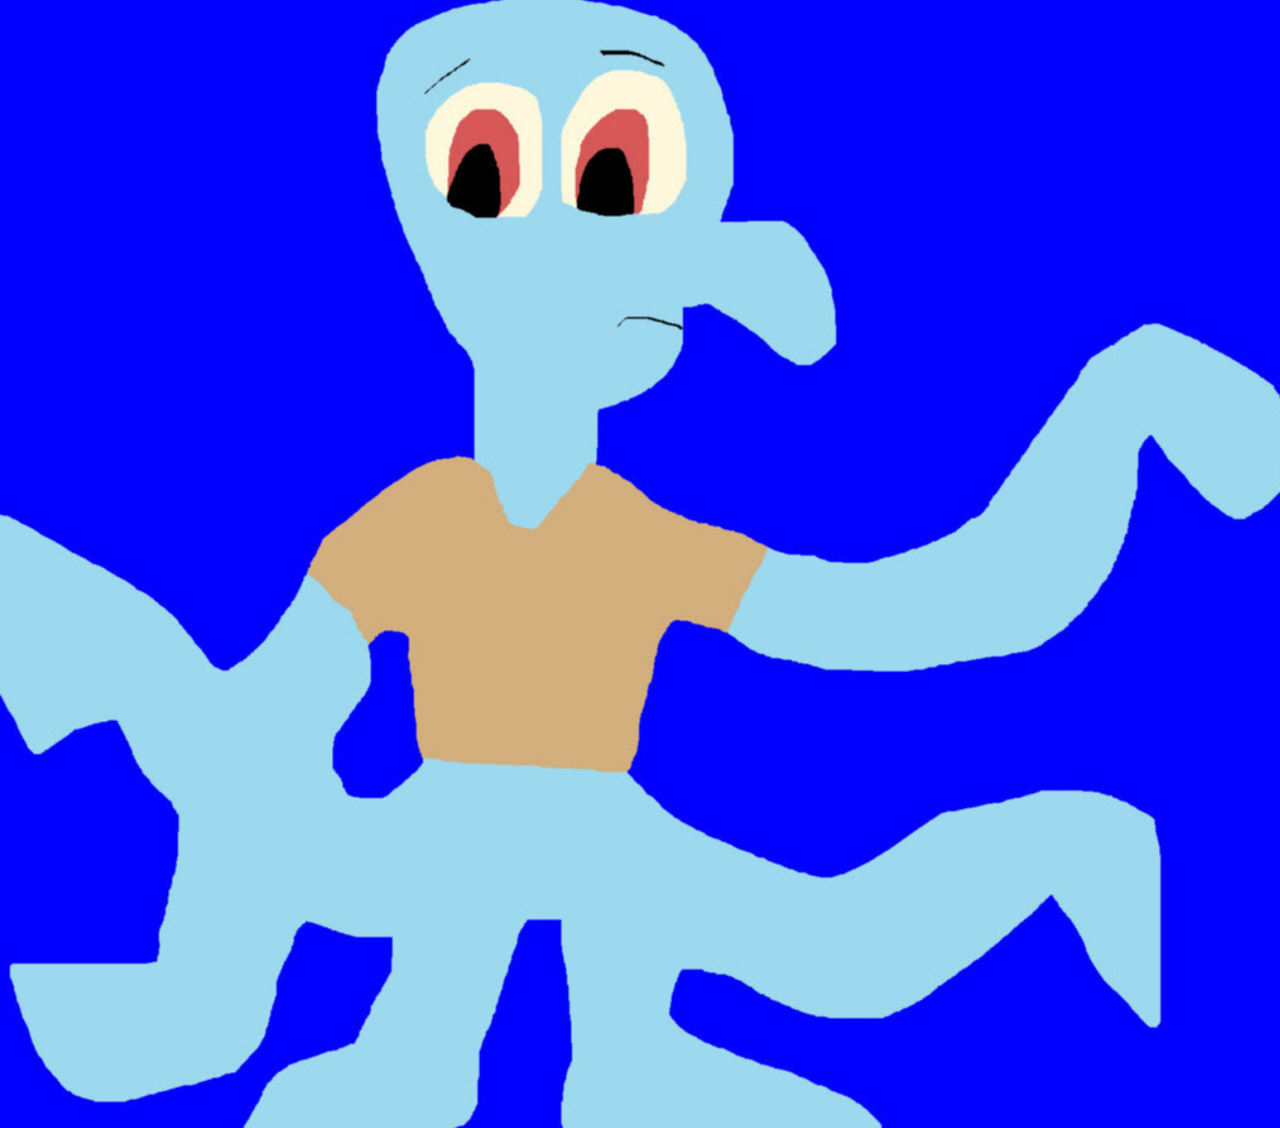 Squidward Is All Tentacles MS Paint I Was Bored by Falconlobo